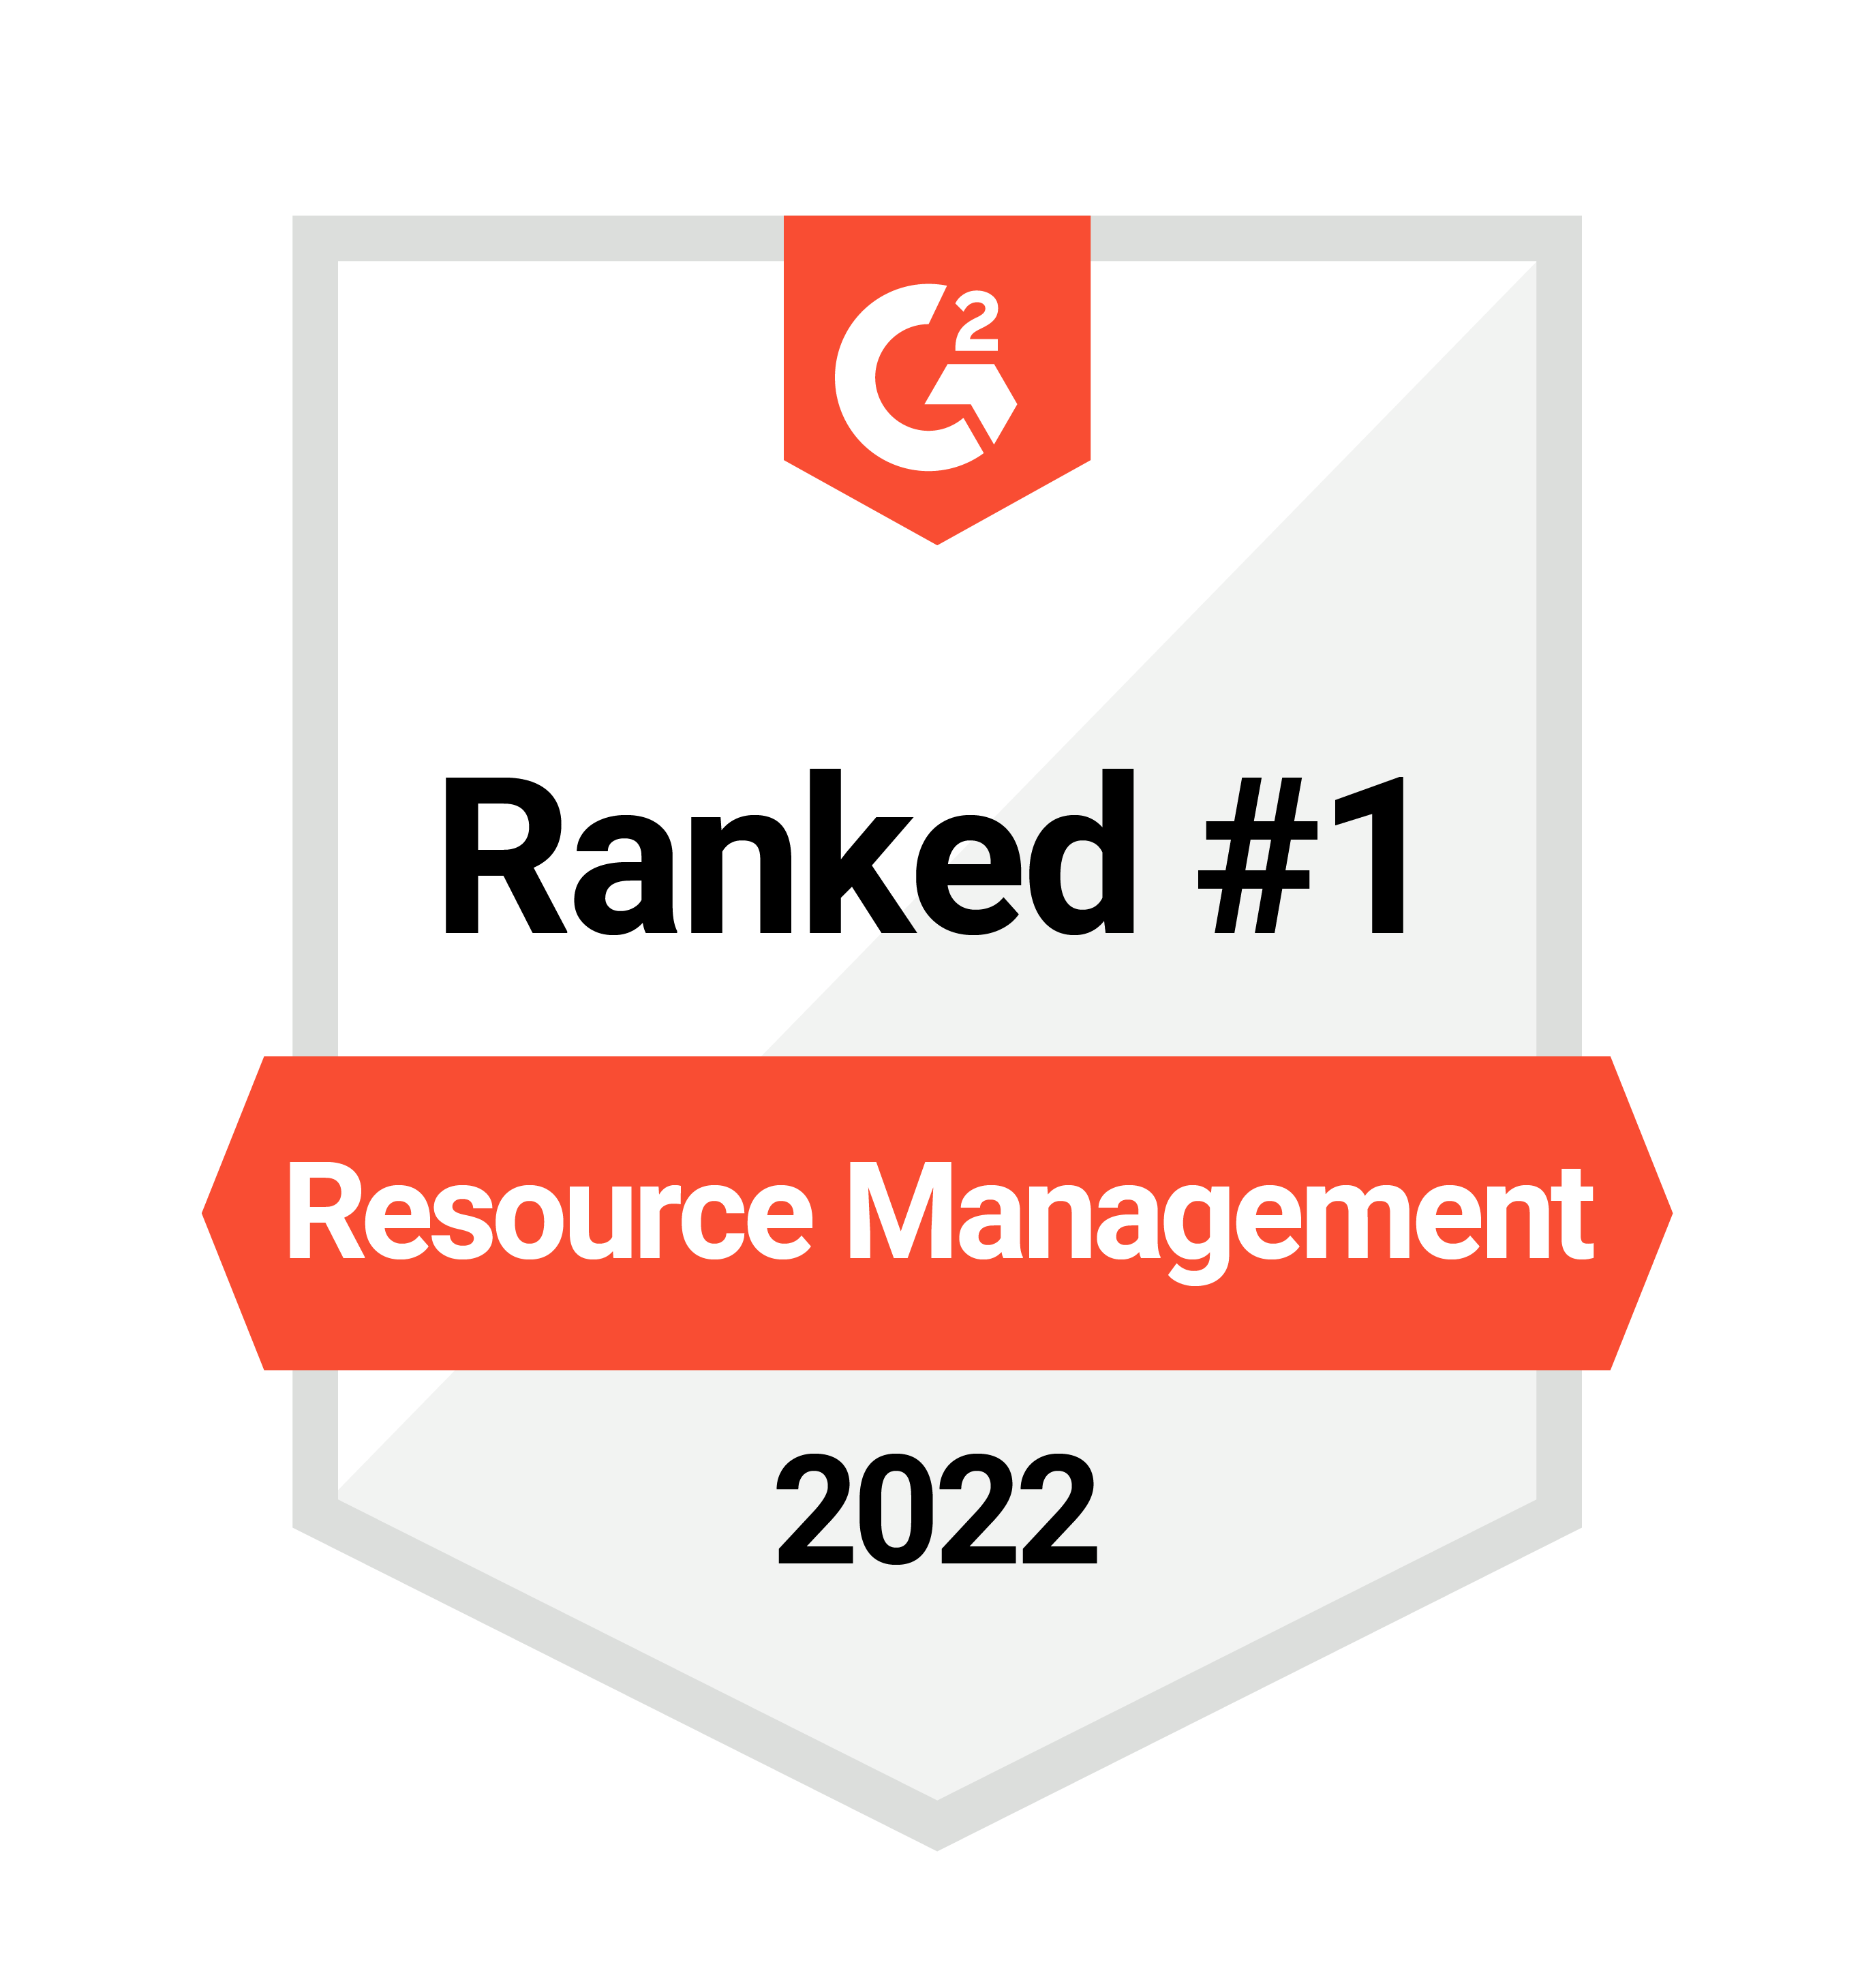 G2 Ranked #1 in Resource Management